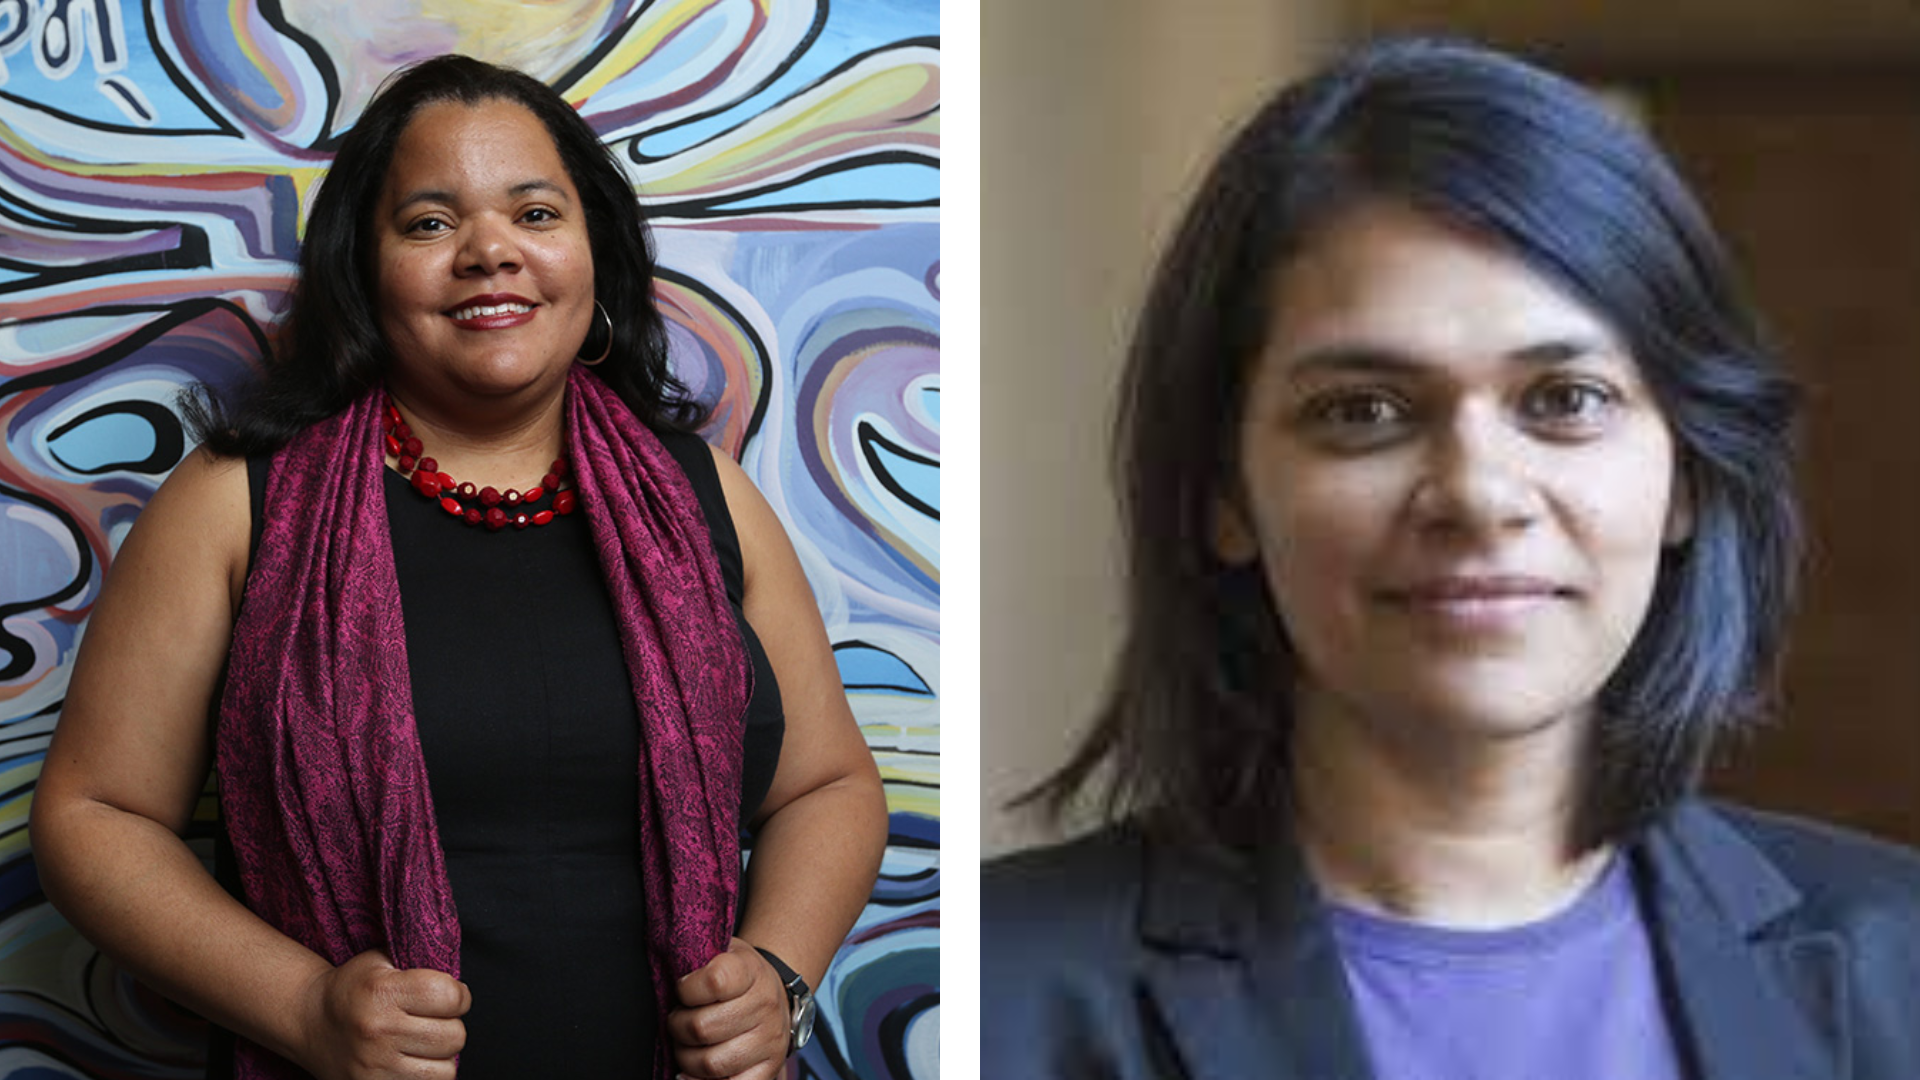 A headshot of Dr. Erica Walker in a black dress and red scarf on the left, and a headshot of Dr. Lalitha Vasudevan in a periwinkle shirt and black blazer on the right.